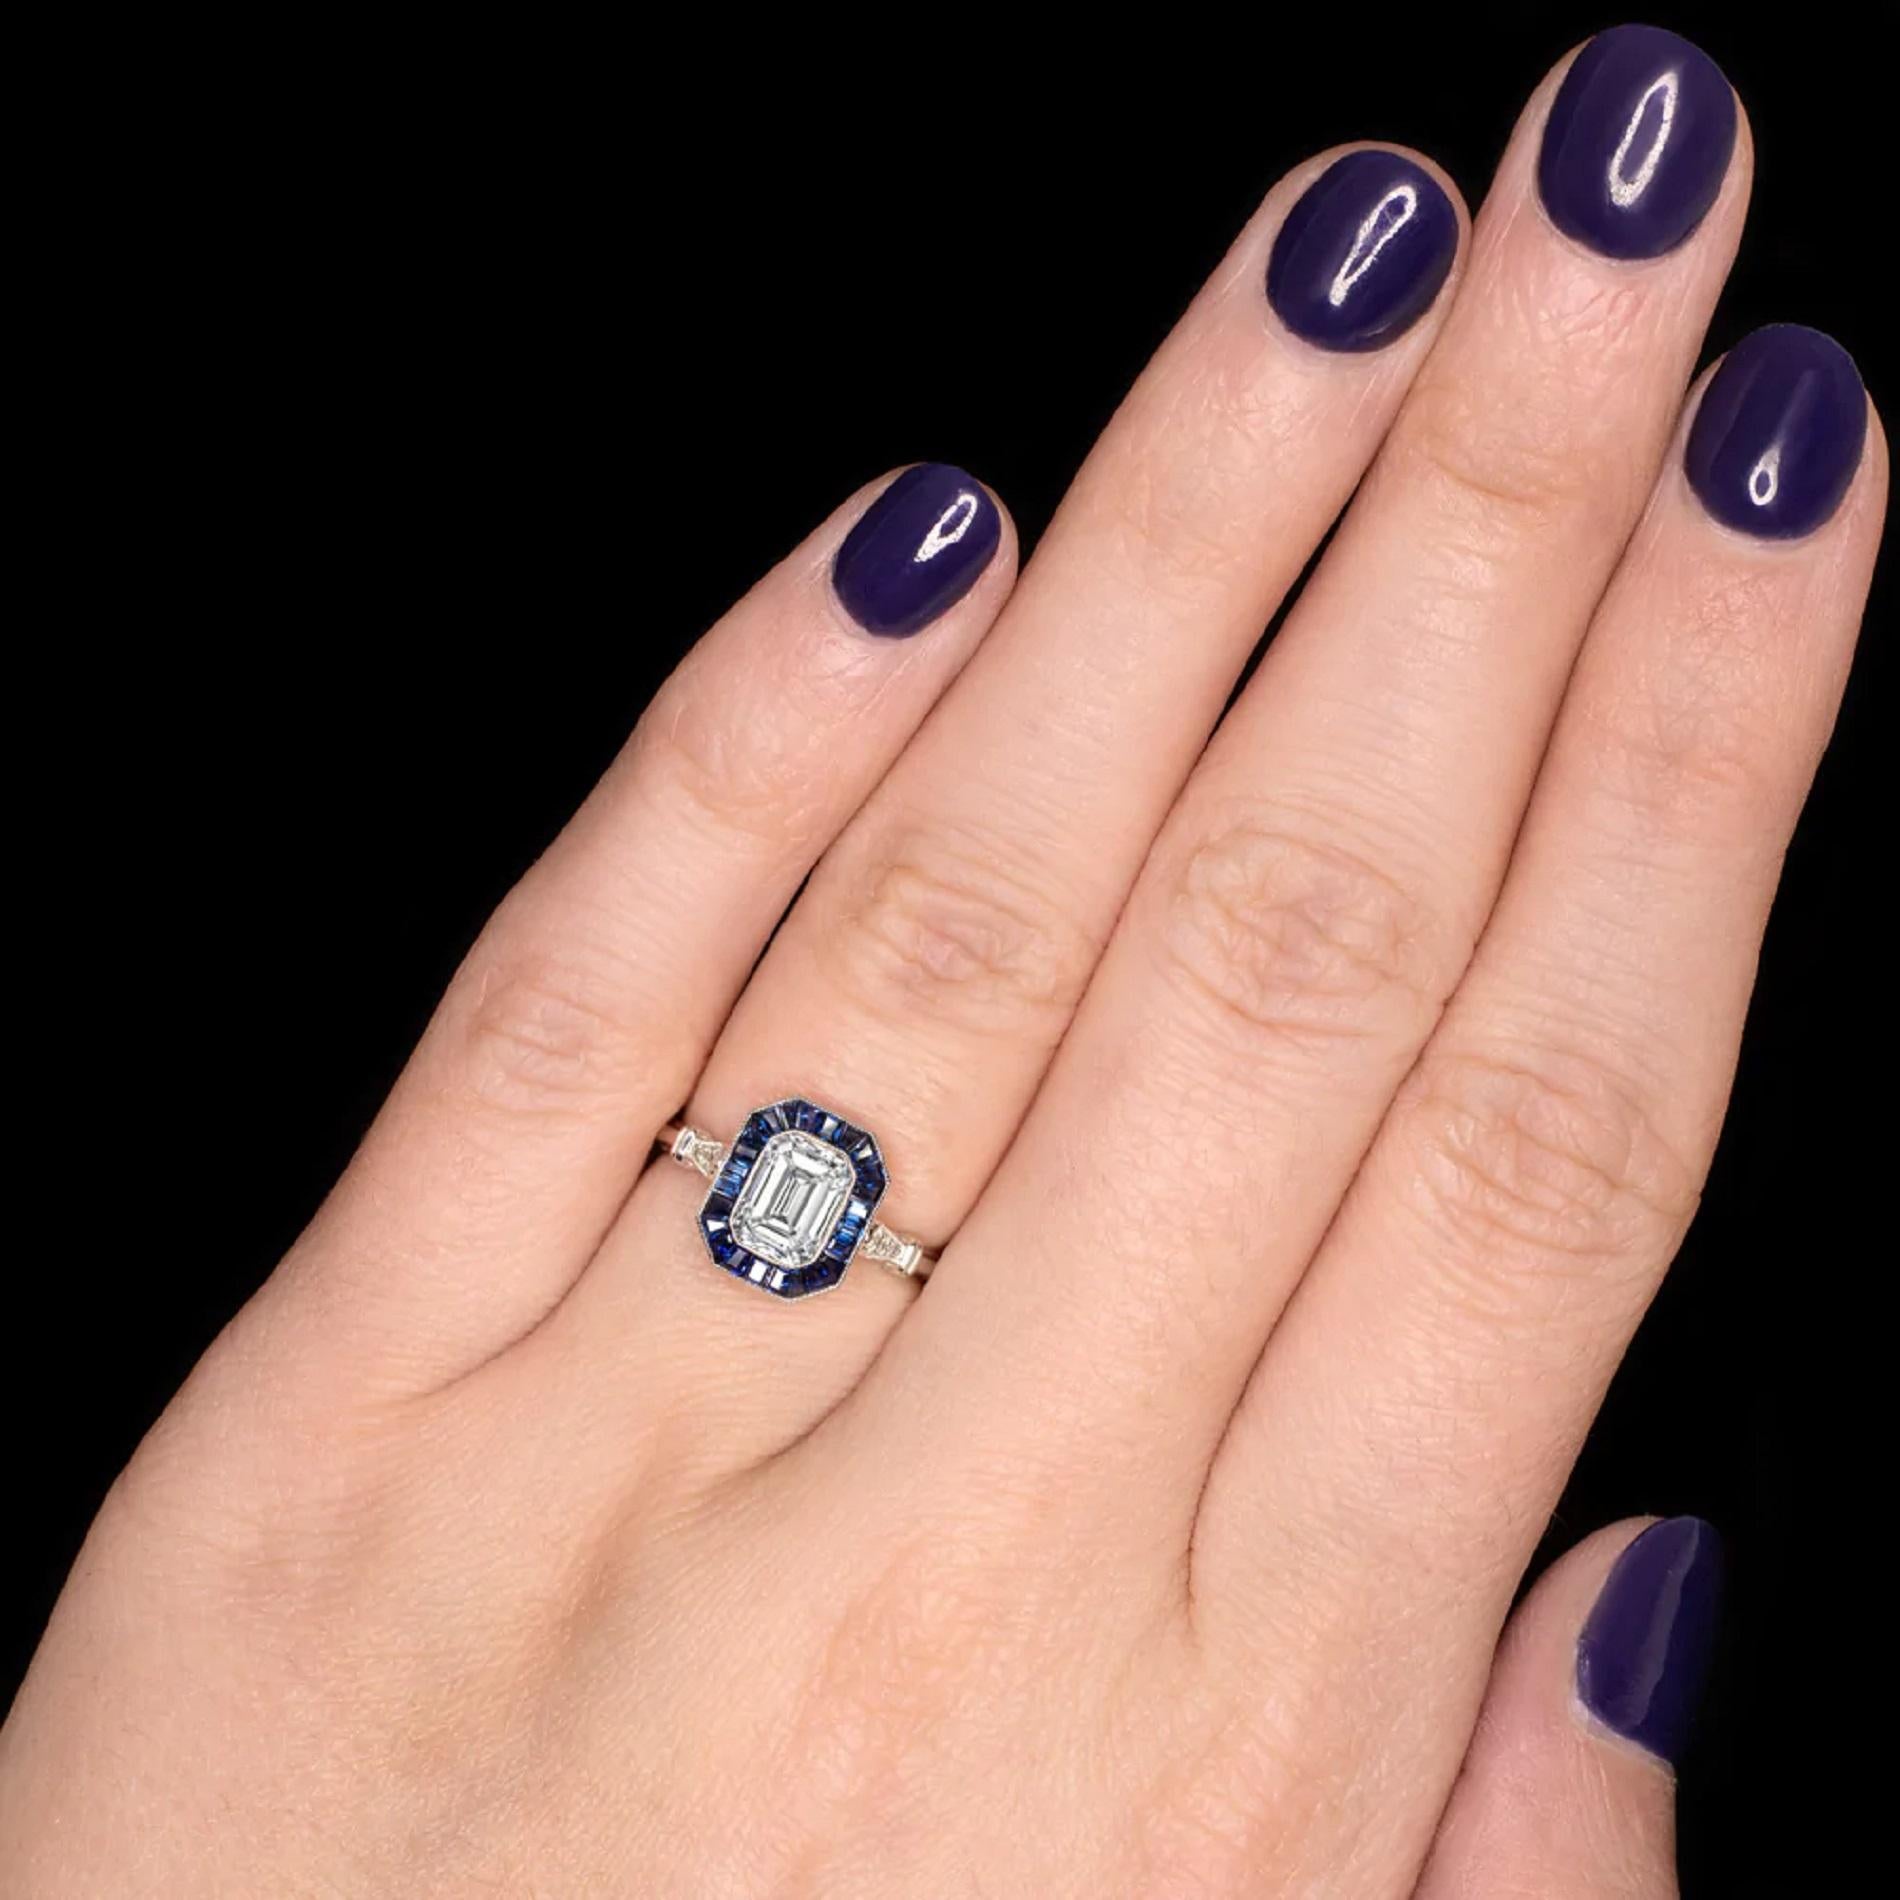 Stunning vintage inspired ring features a high quality 1.20 carat natural diamond set off by a rich blue sapphire halo. The GIA H VVS2 diamond is beautifully white and exceptionally clean, a gorgeous stone that is sure to become an heirloom!